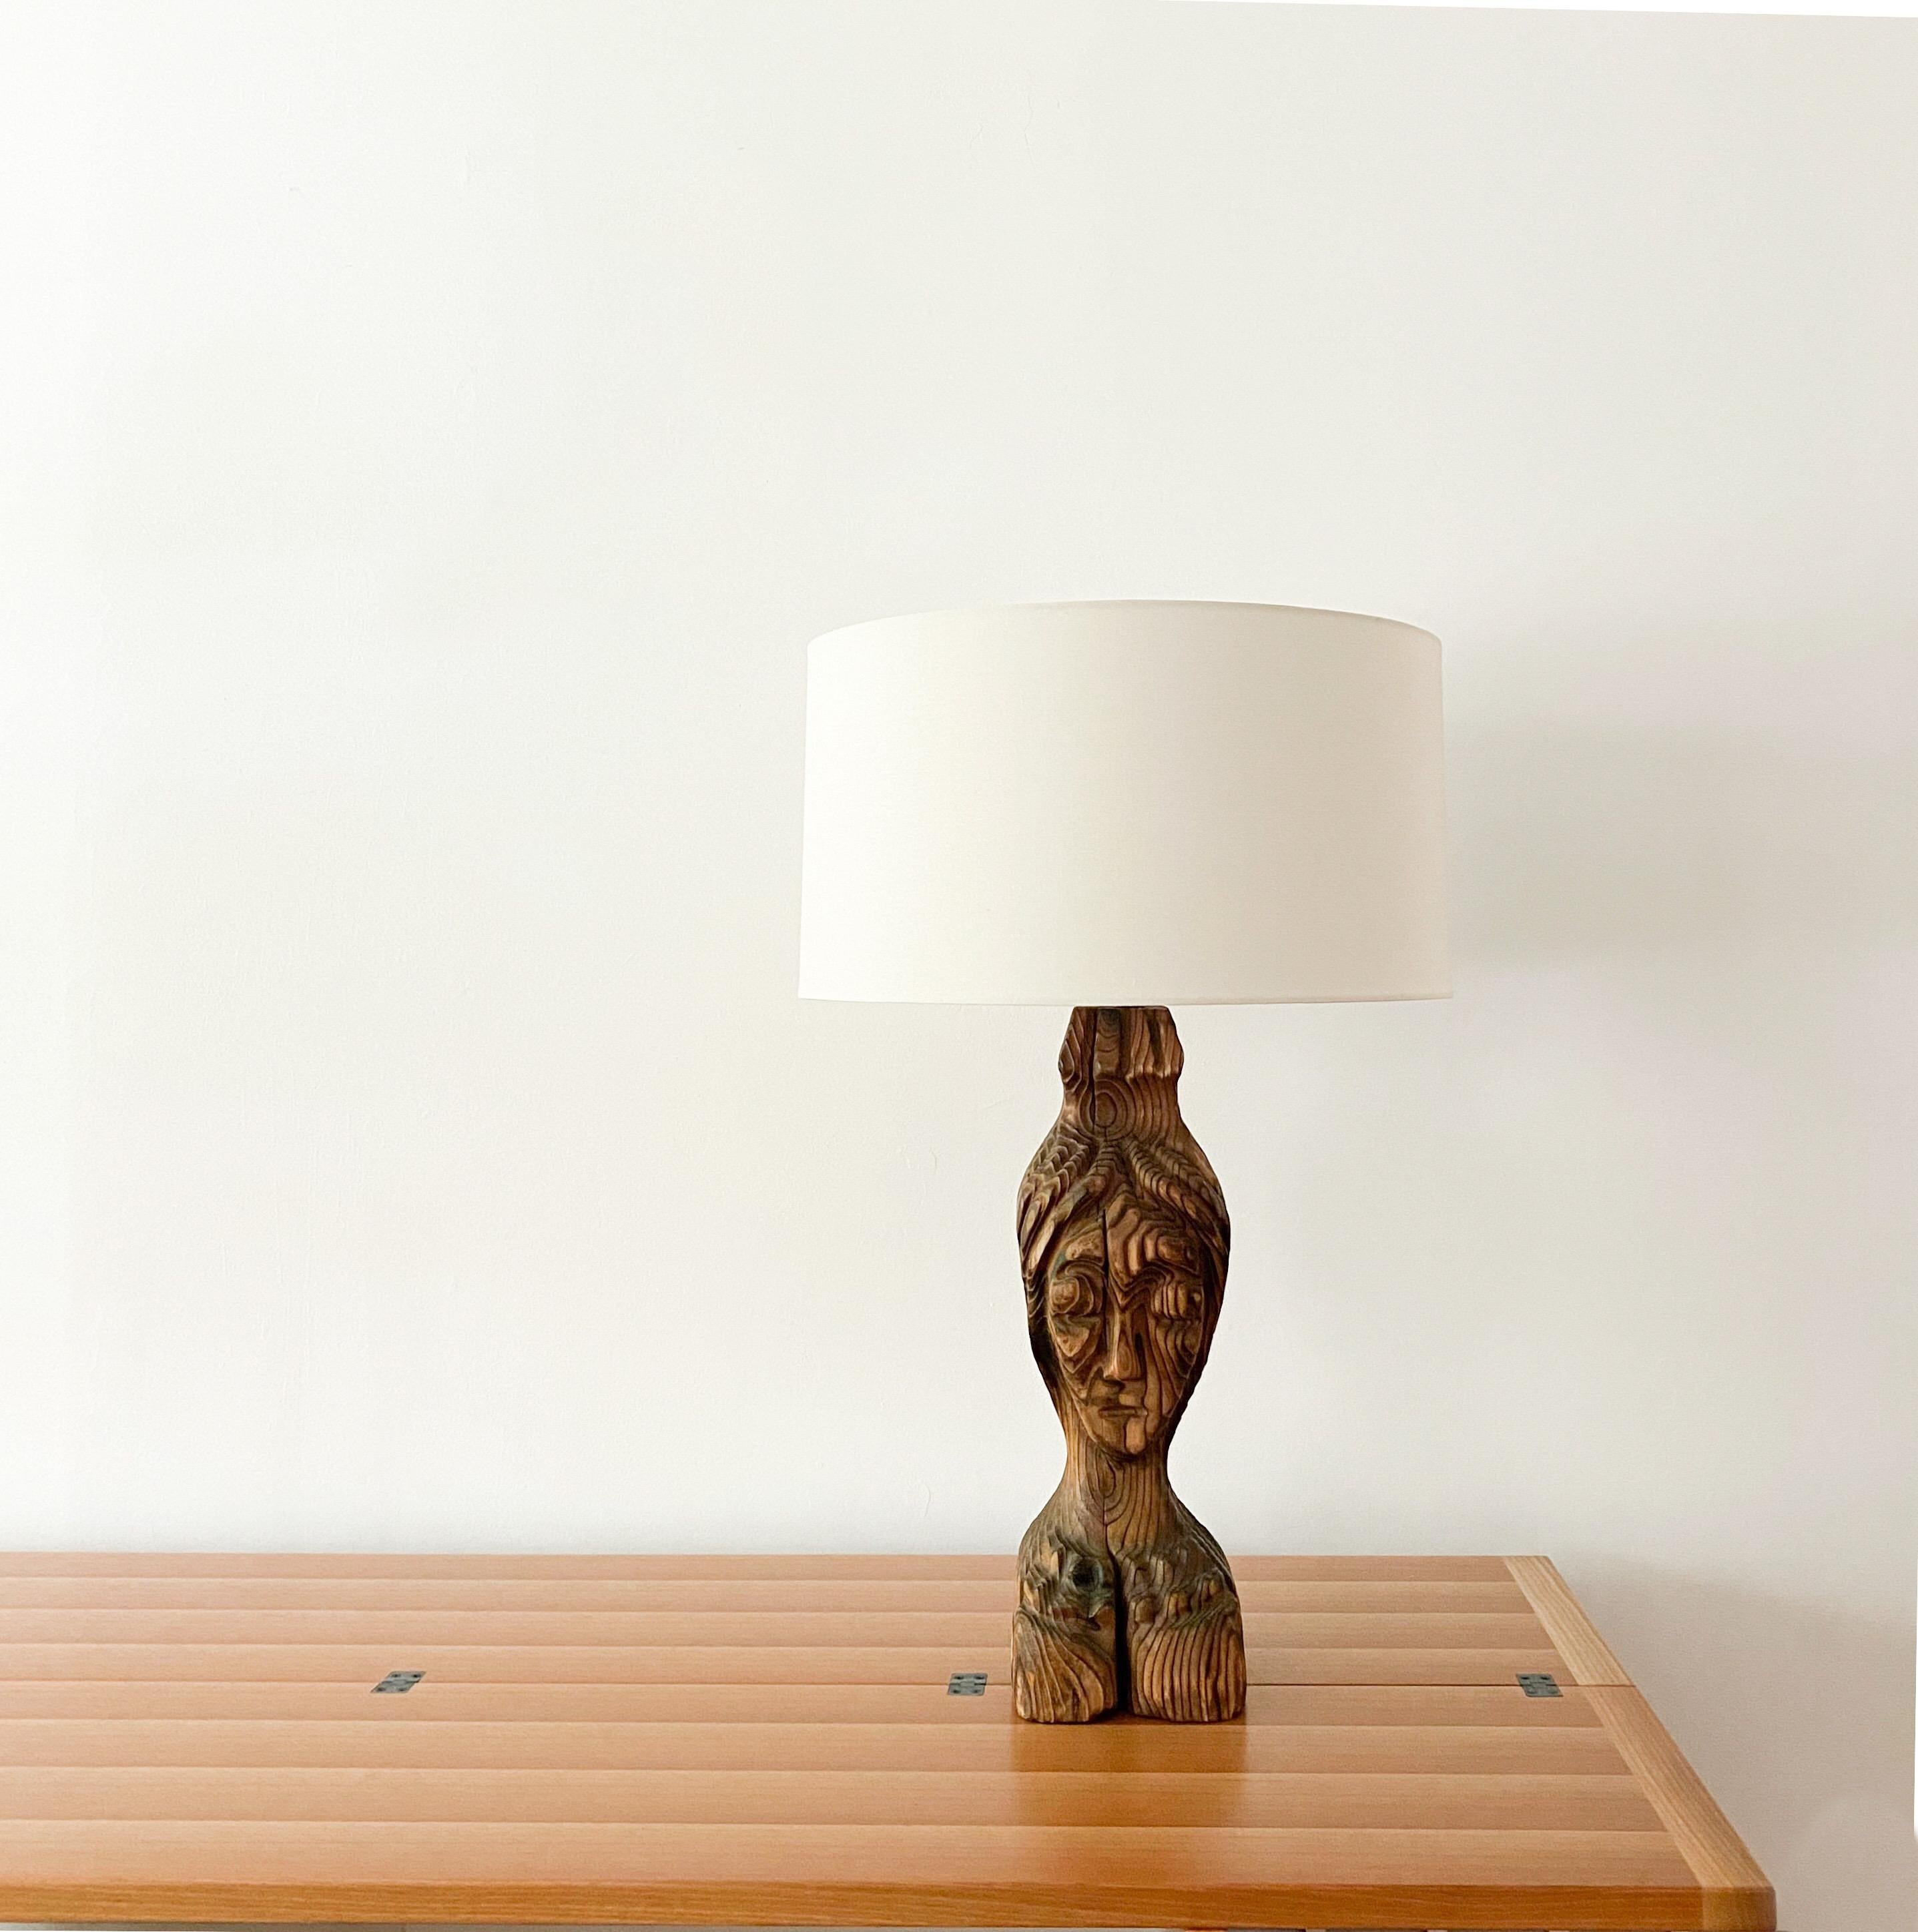 A hand carved sculptural wood lamp manufactured by Witco is from the Mid-20th Century. The imposing lamp has been retrofitted using new electical hardware with a nickel finish, new wrapped gray nylon cording and a new retro plug. The lamp is not